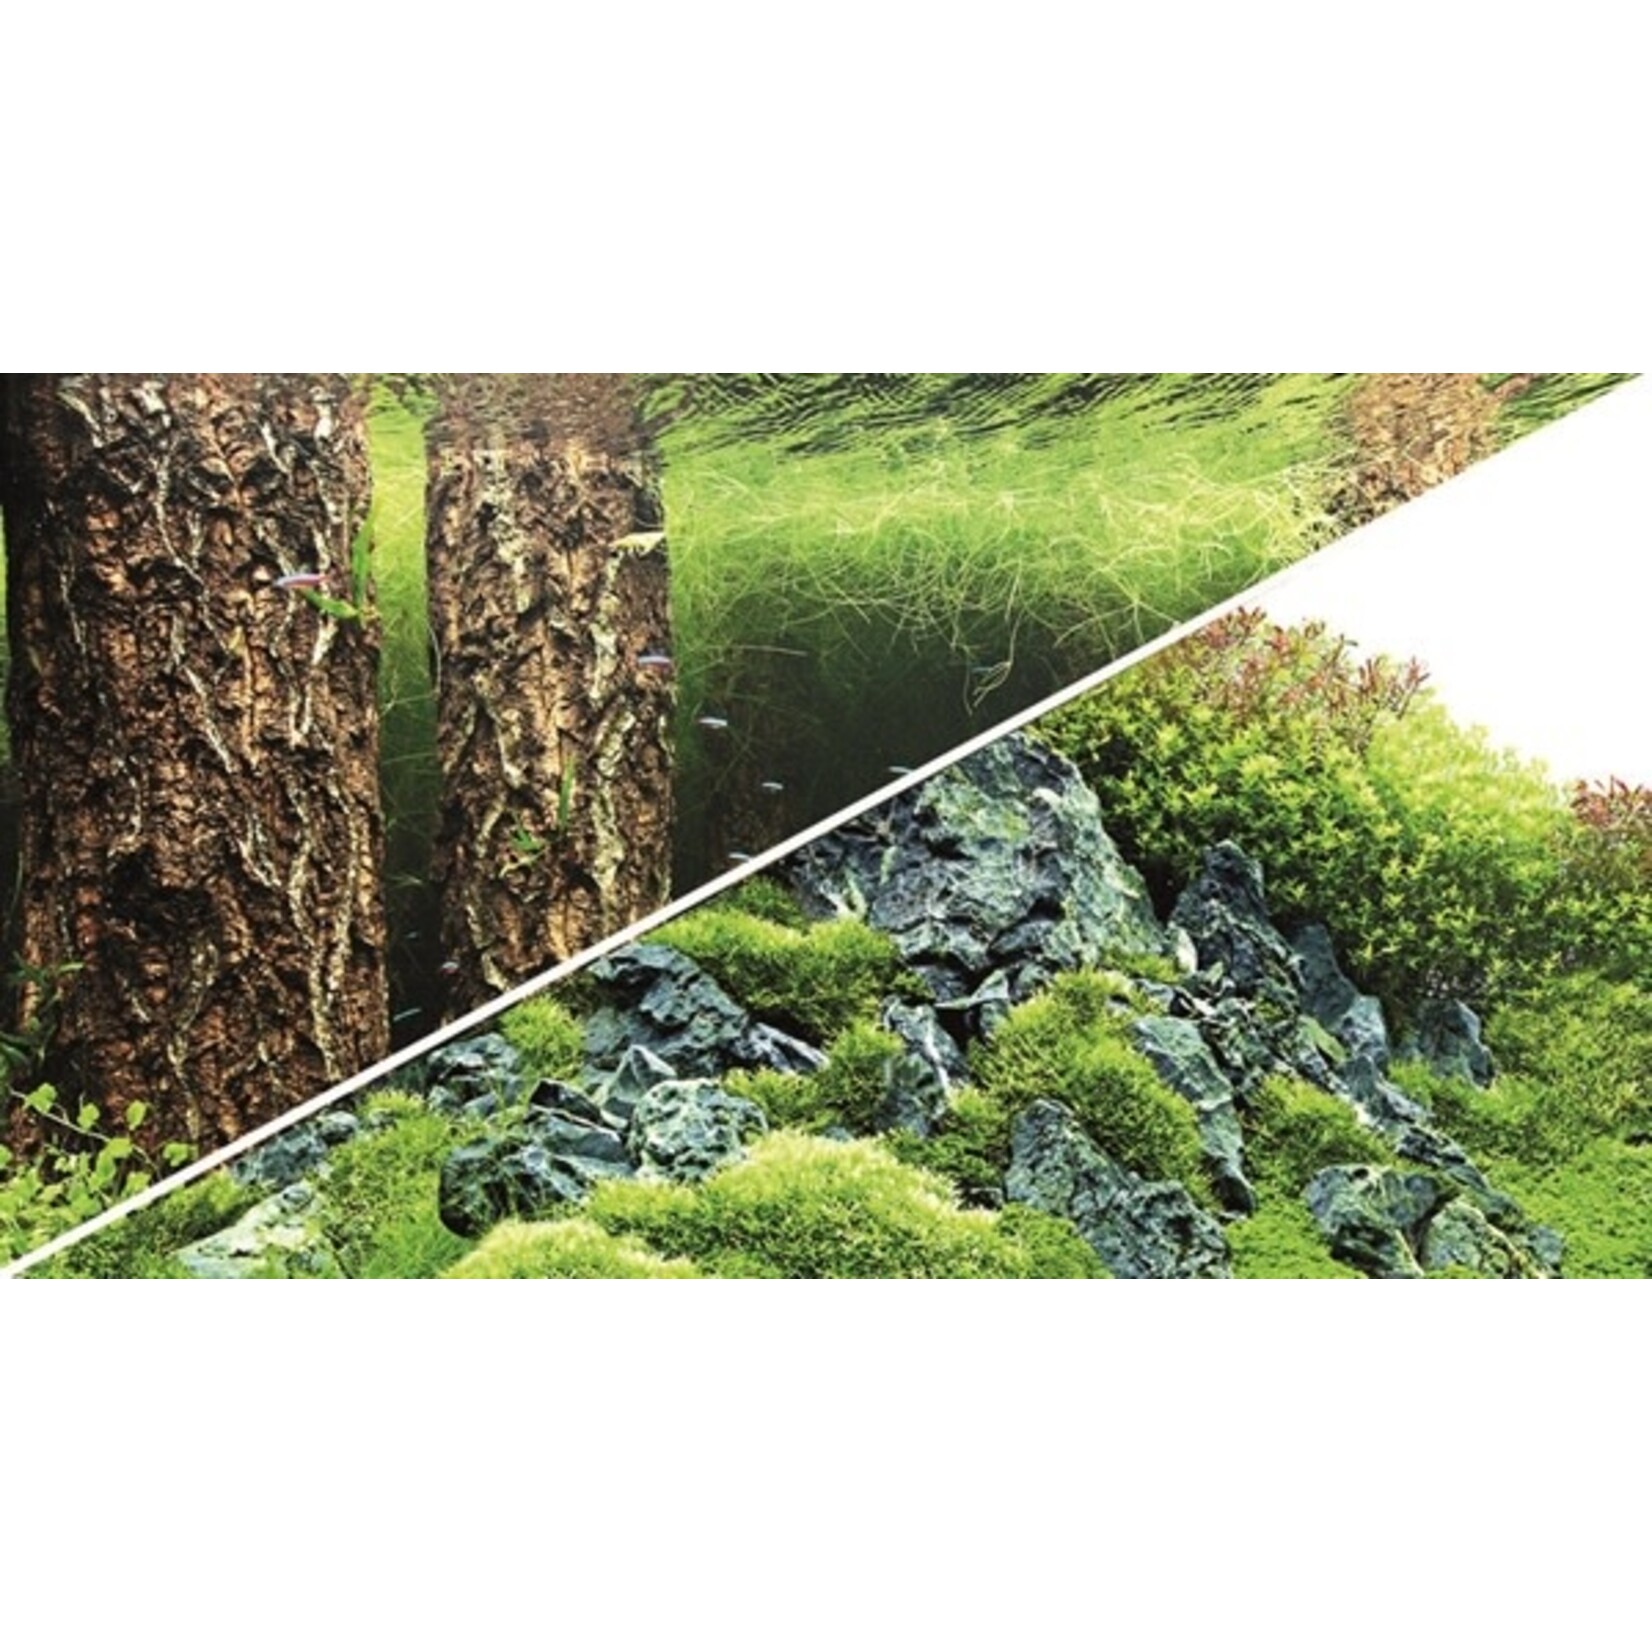 Hobby Foto achterwand scapers hill/scapers forest 60 cm x 1 meter